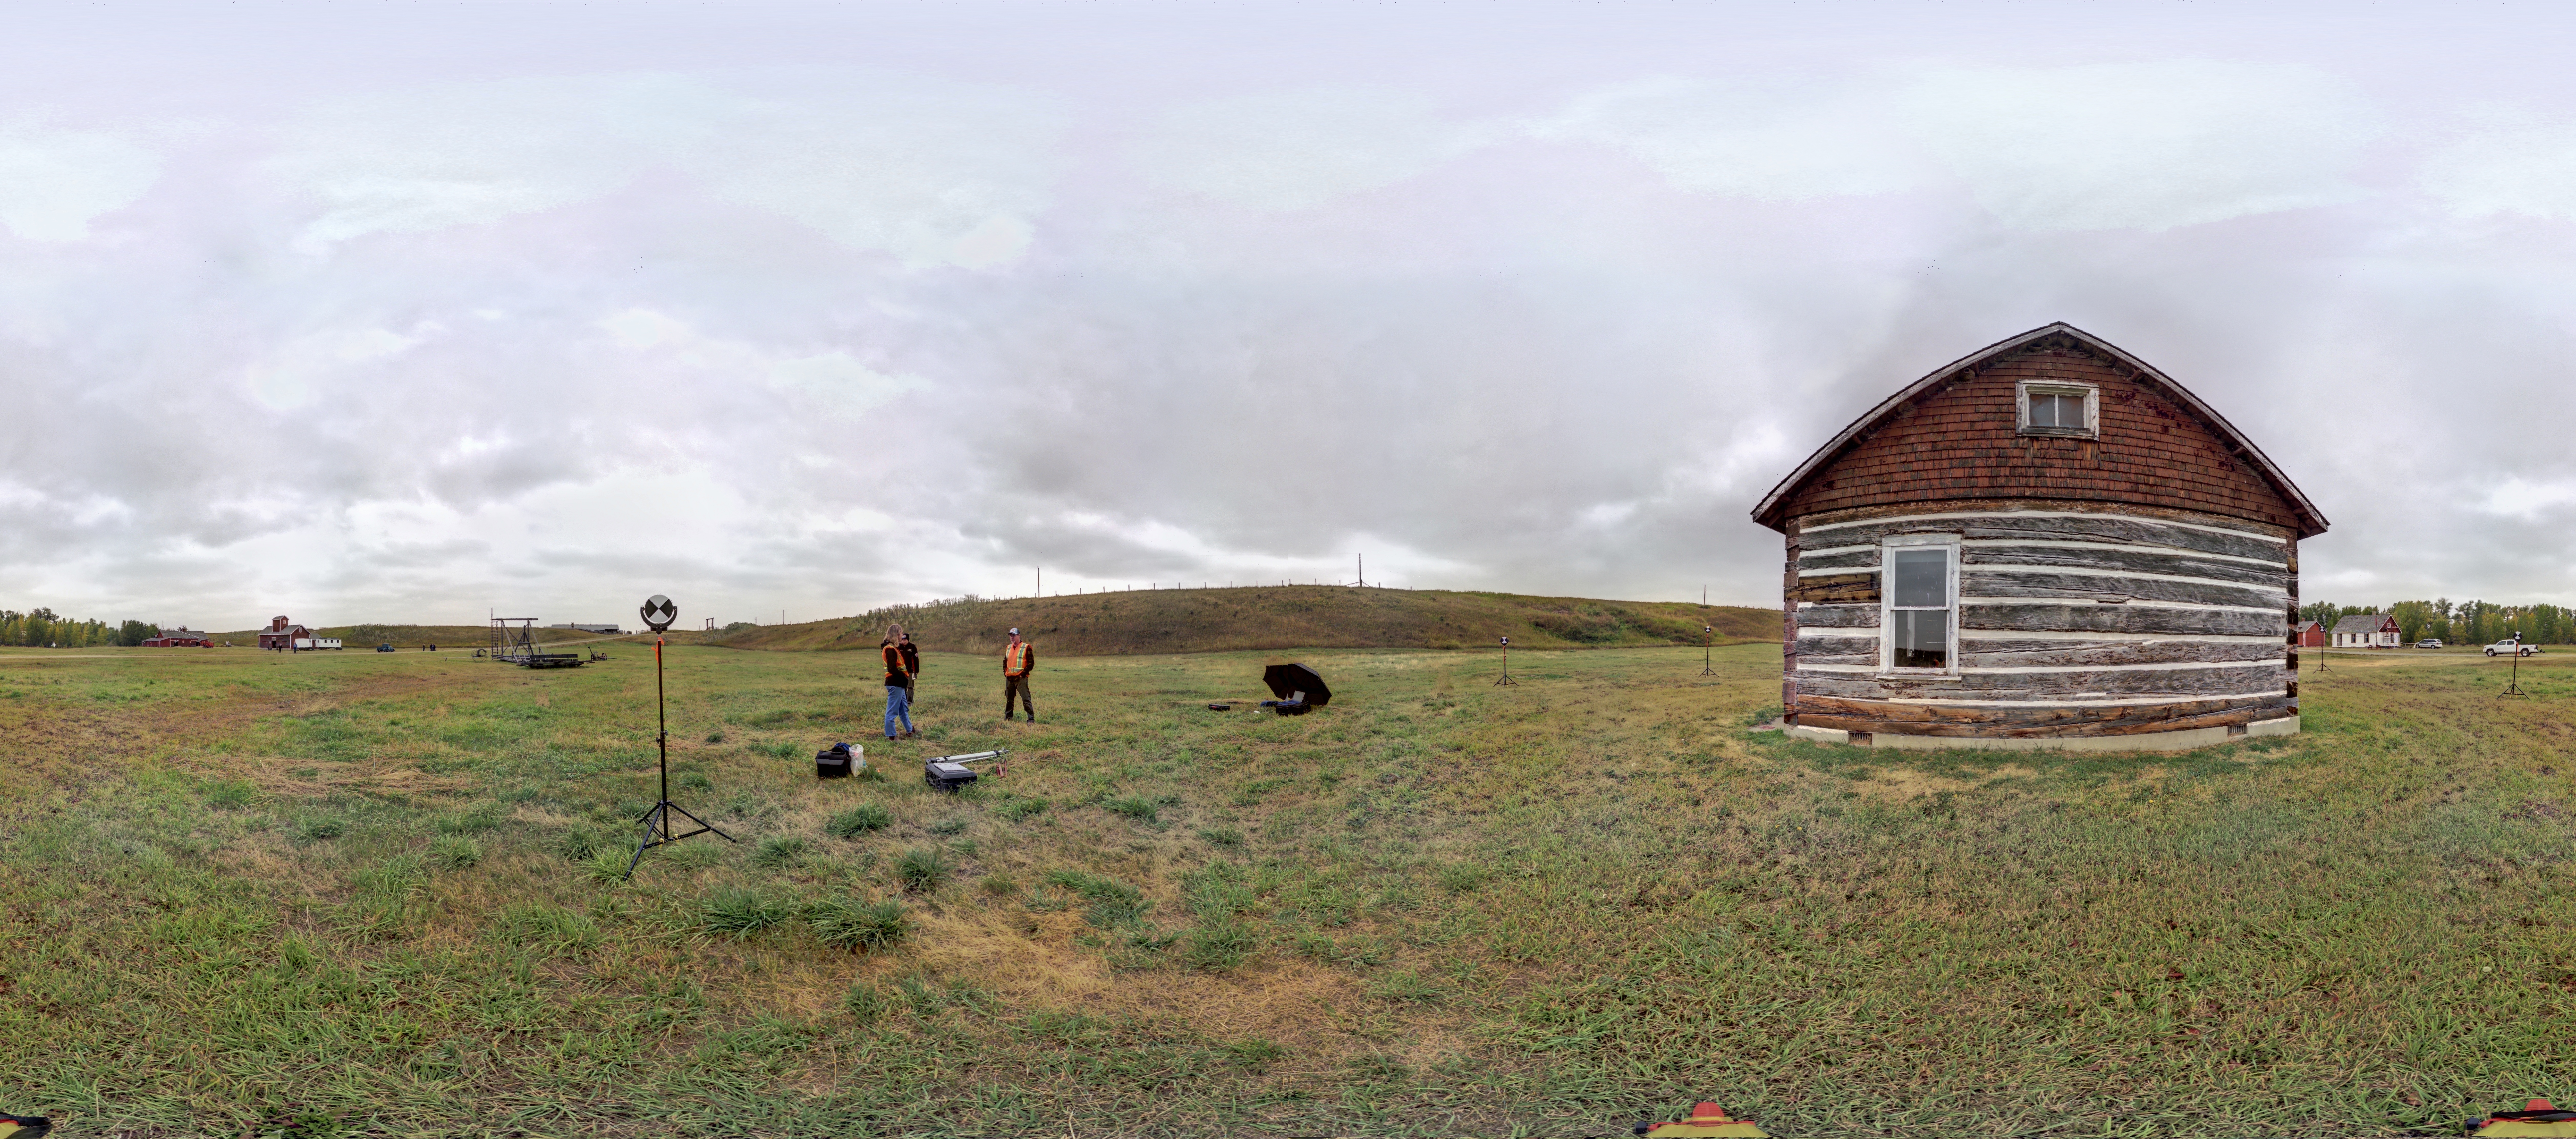 Panoramic image of scanning location 11 of the exterior of the Foreman's House at Bar U Ranch